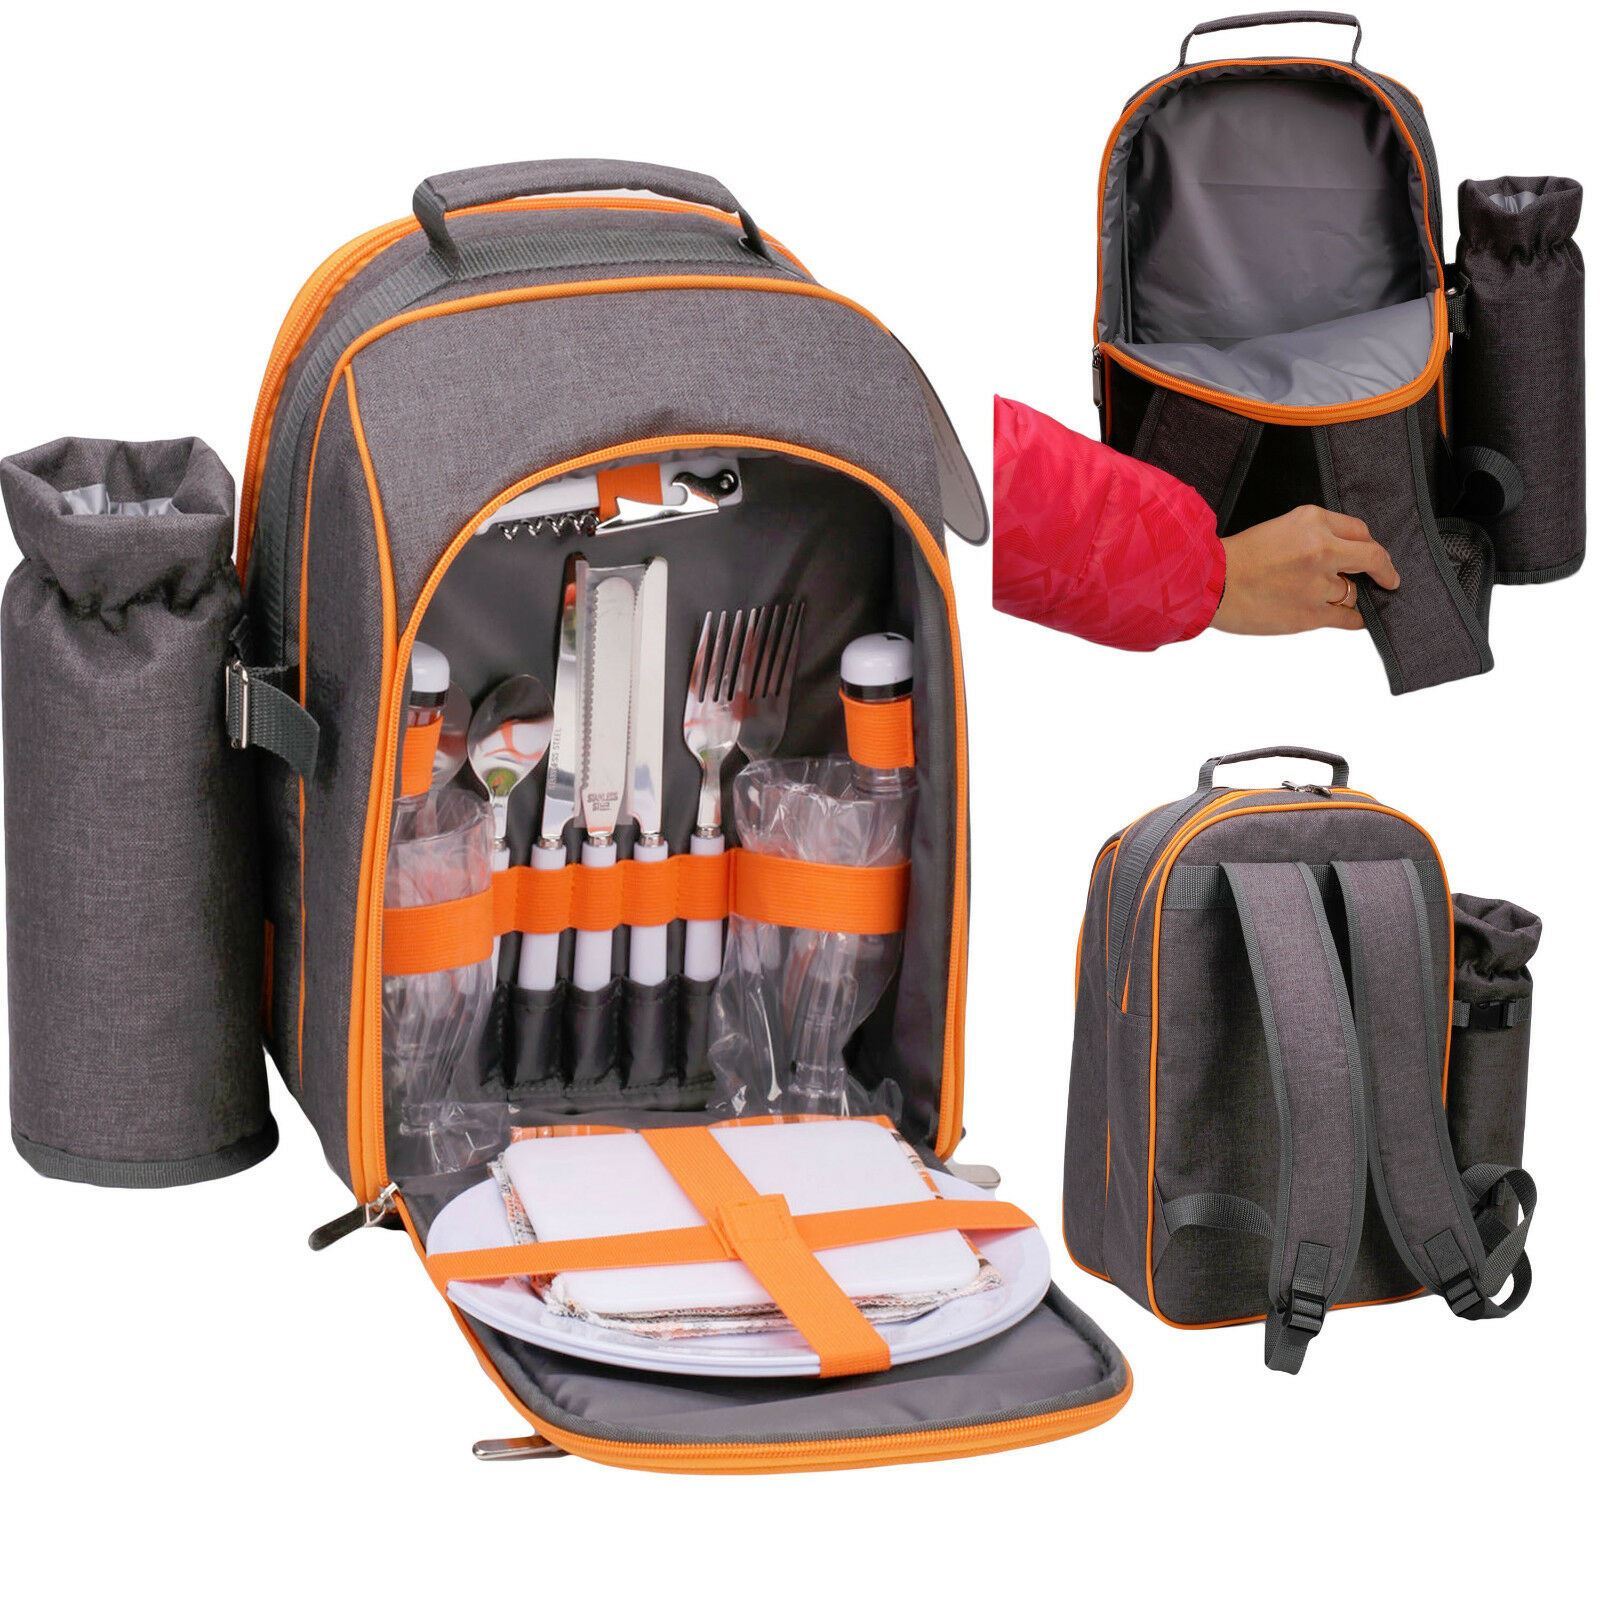 2 Person Picnic Cooler Bag With Accessories, EAN: 0706502829759 GEEZY - The Magic Toy Shop